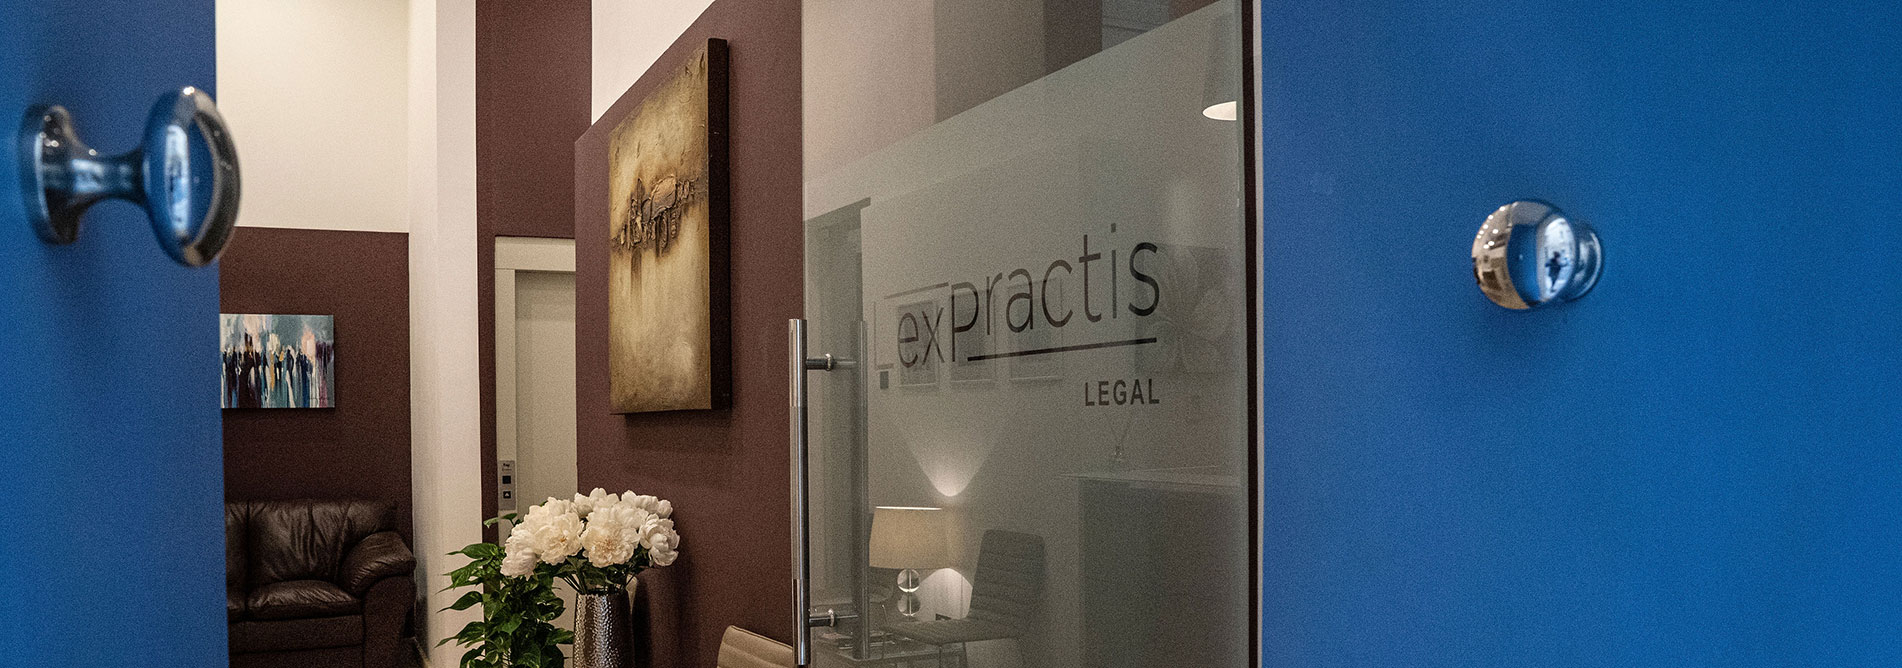 Lexpractis Office Entrance